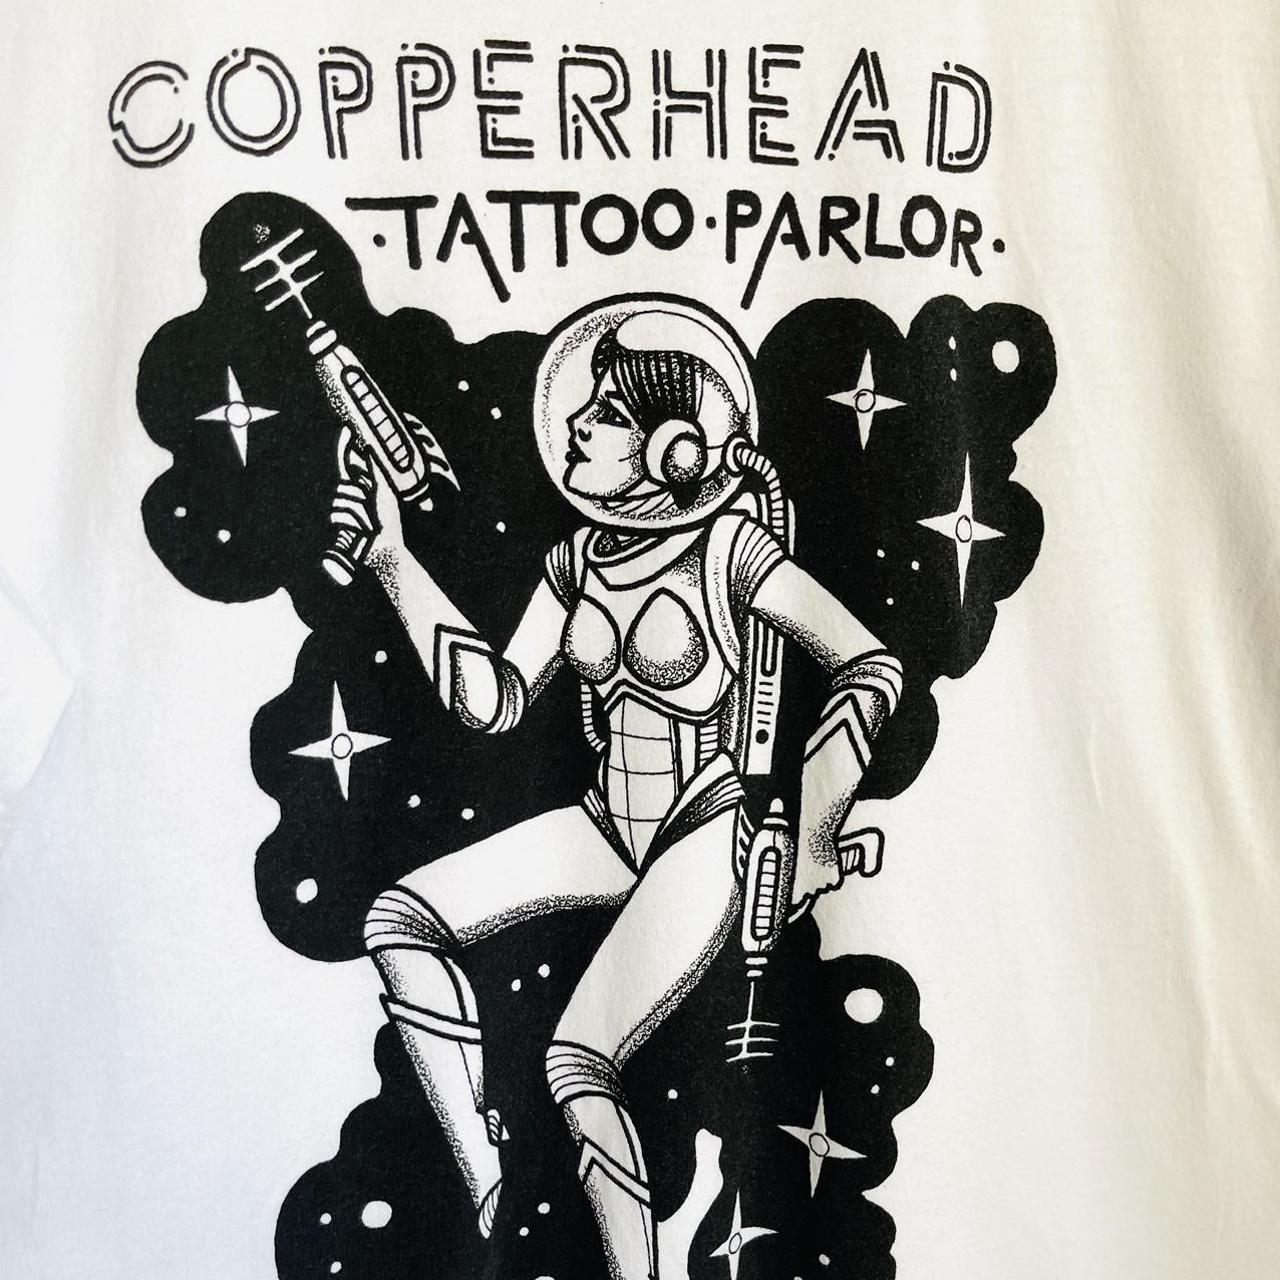 Copperhead Tattoo copperheadtattoo  Instagram photos and videos